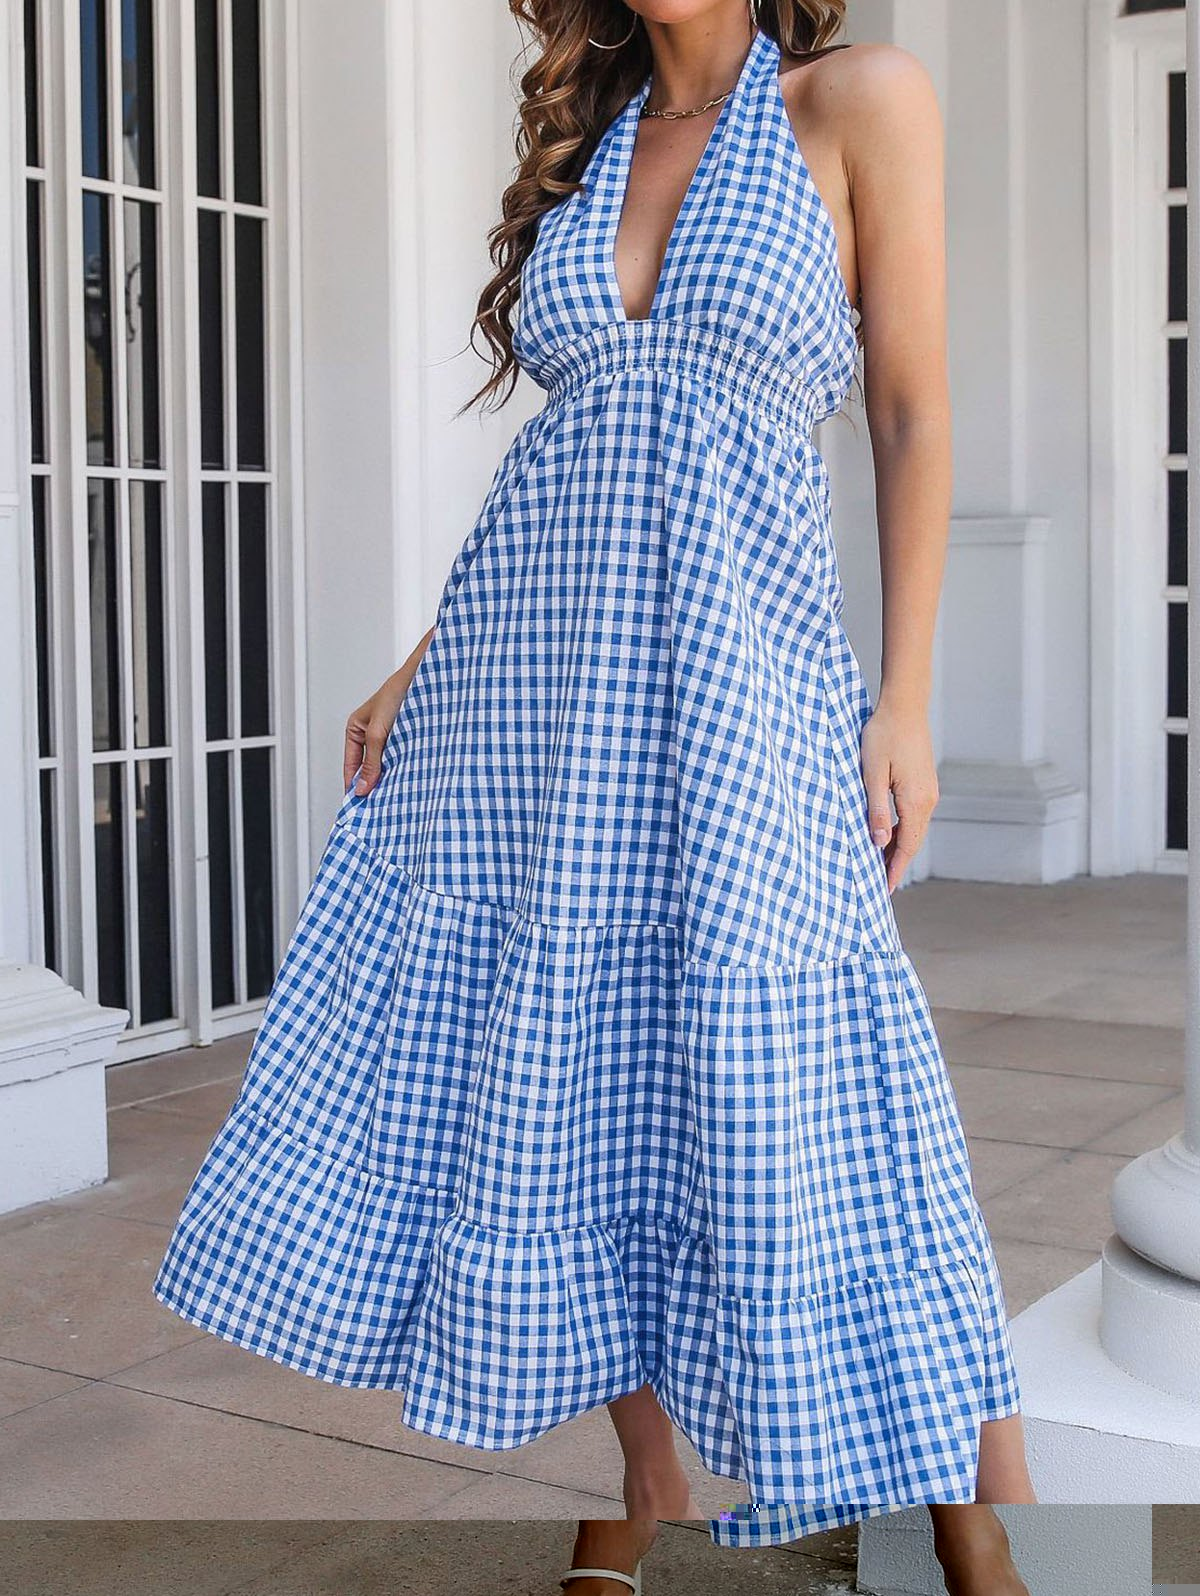 Plaid Print Halter Dress Plunging Neck High Waisted Tied Open Back A Line Maxi Dress - BLUE L